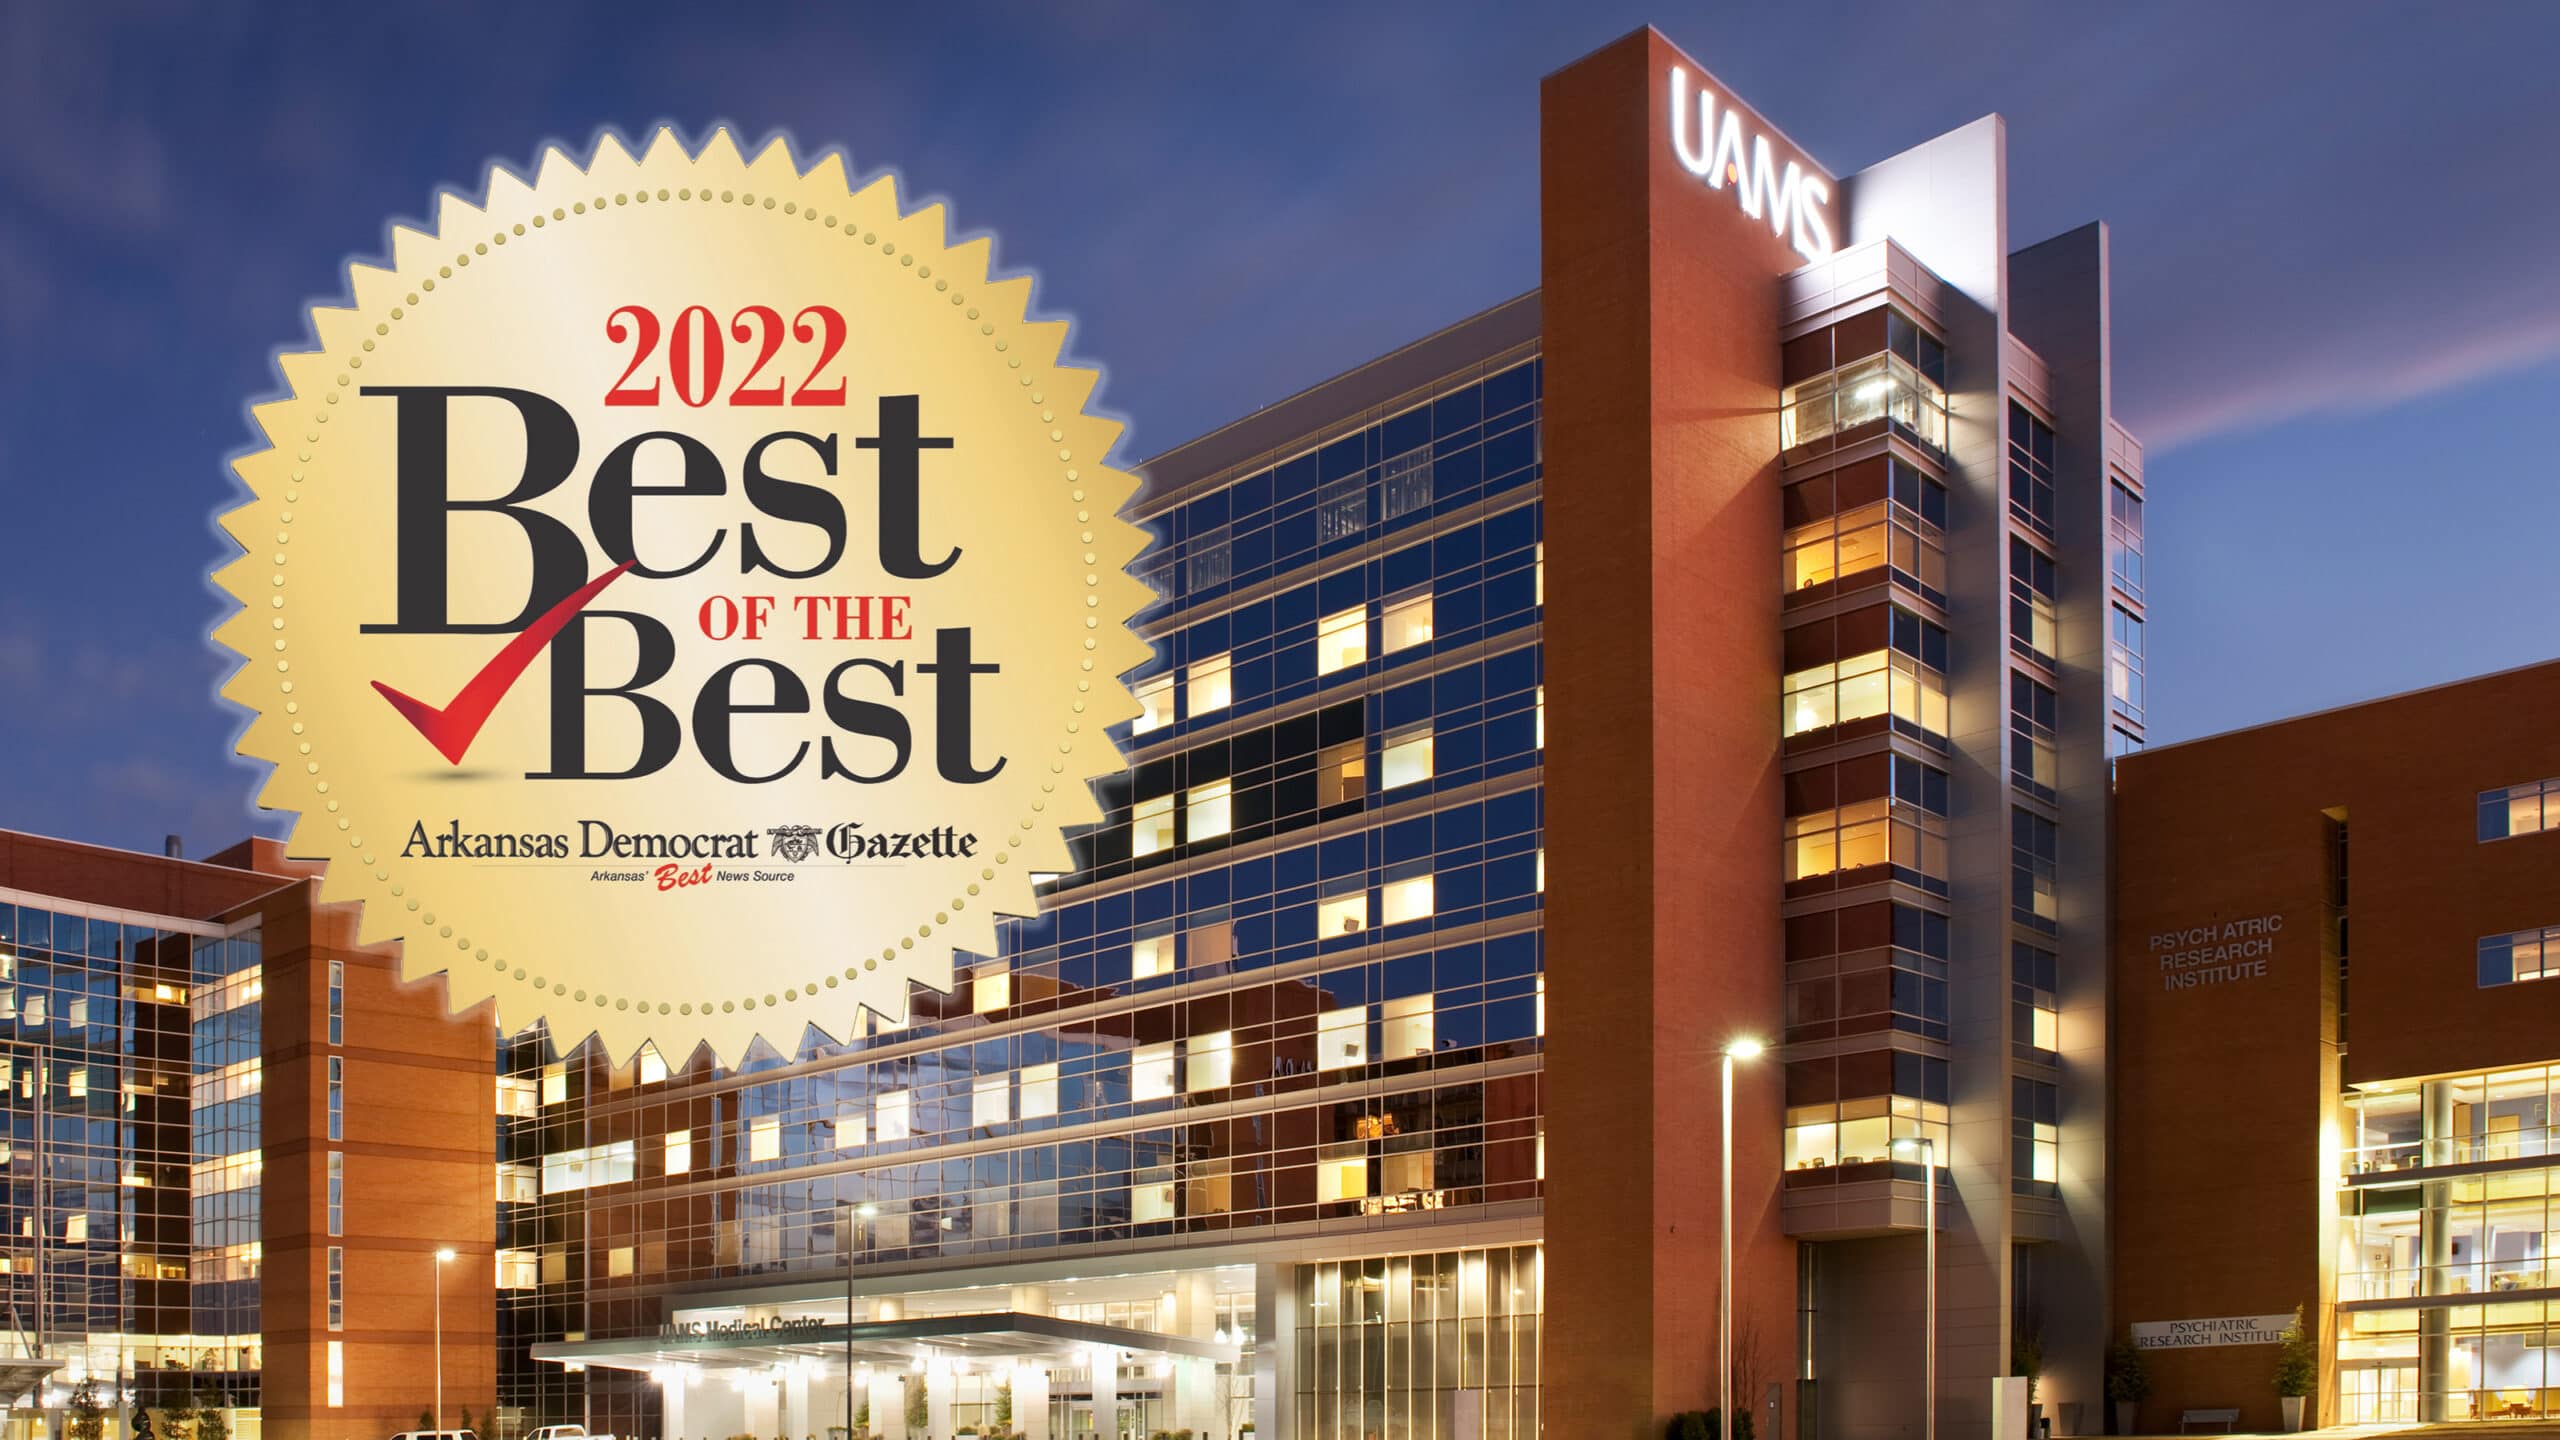 Readers of the Arkansas Democrat-Gazette voted UAMS the Best Company to Work For among companies with 250 employees or more.